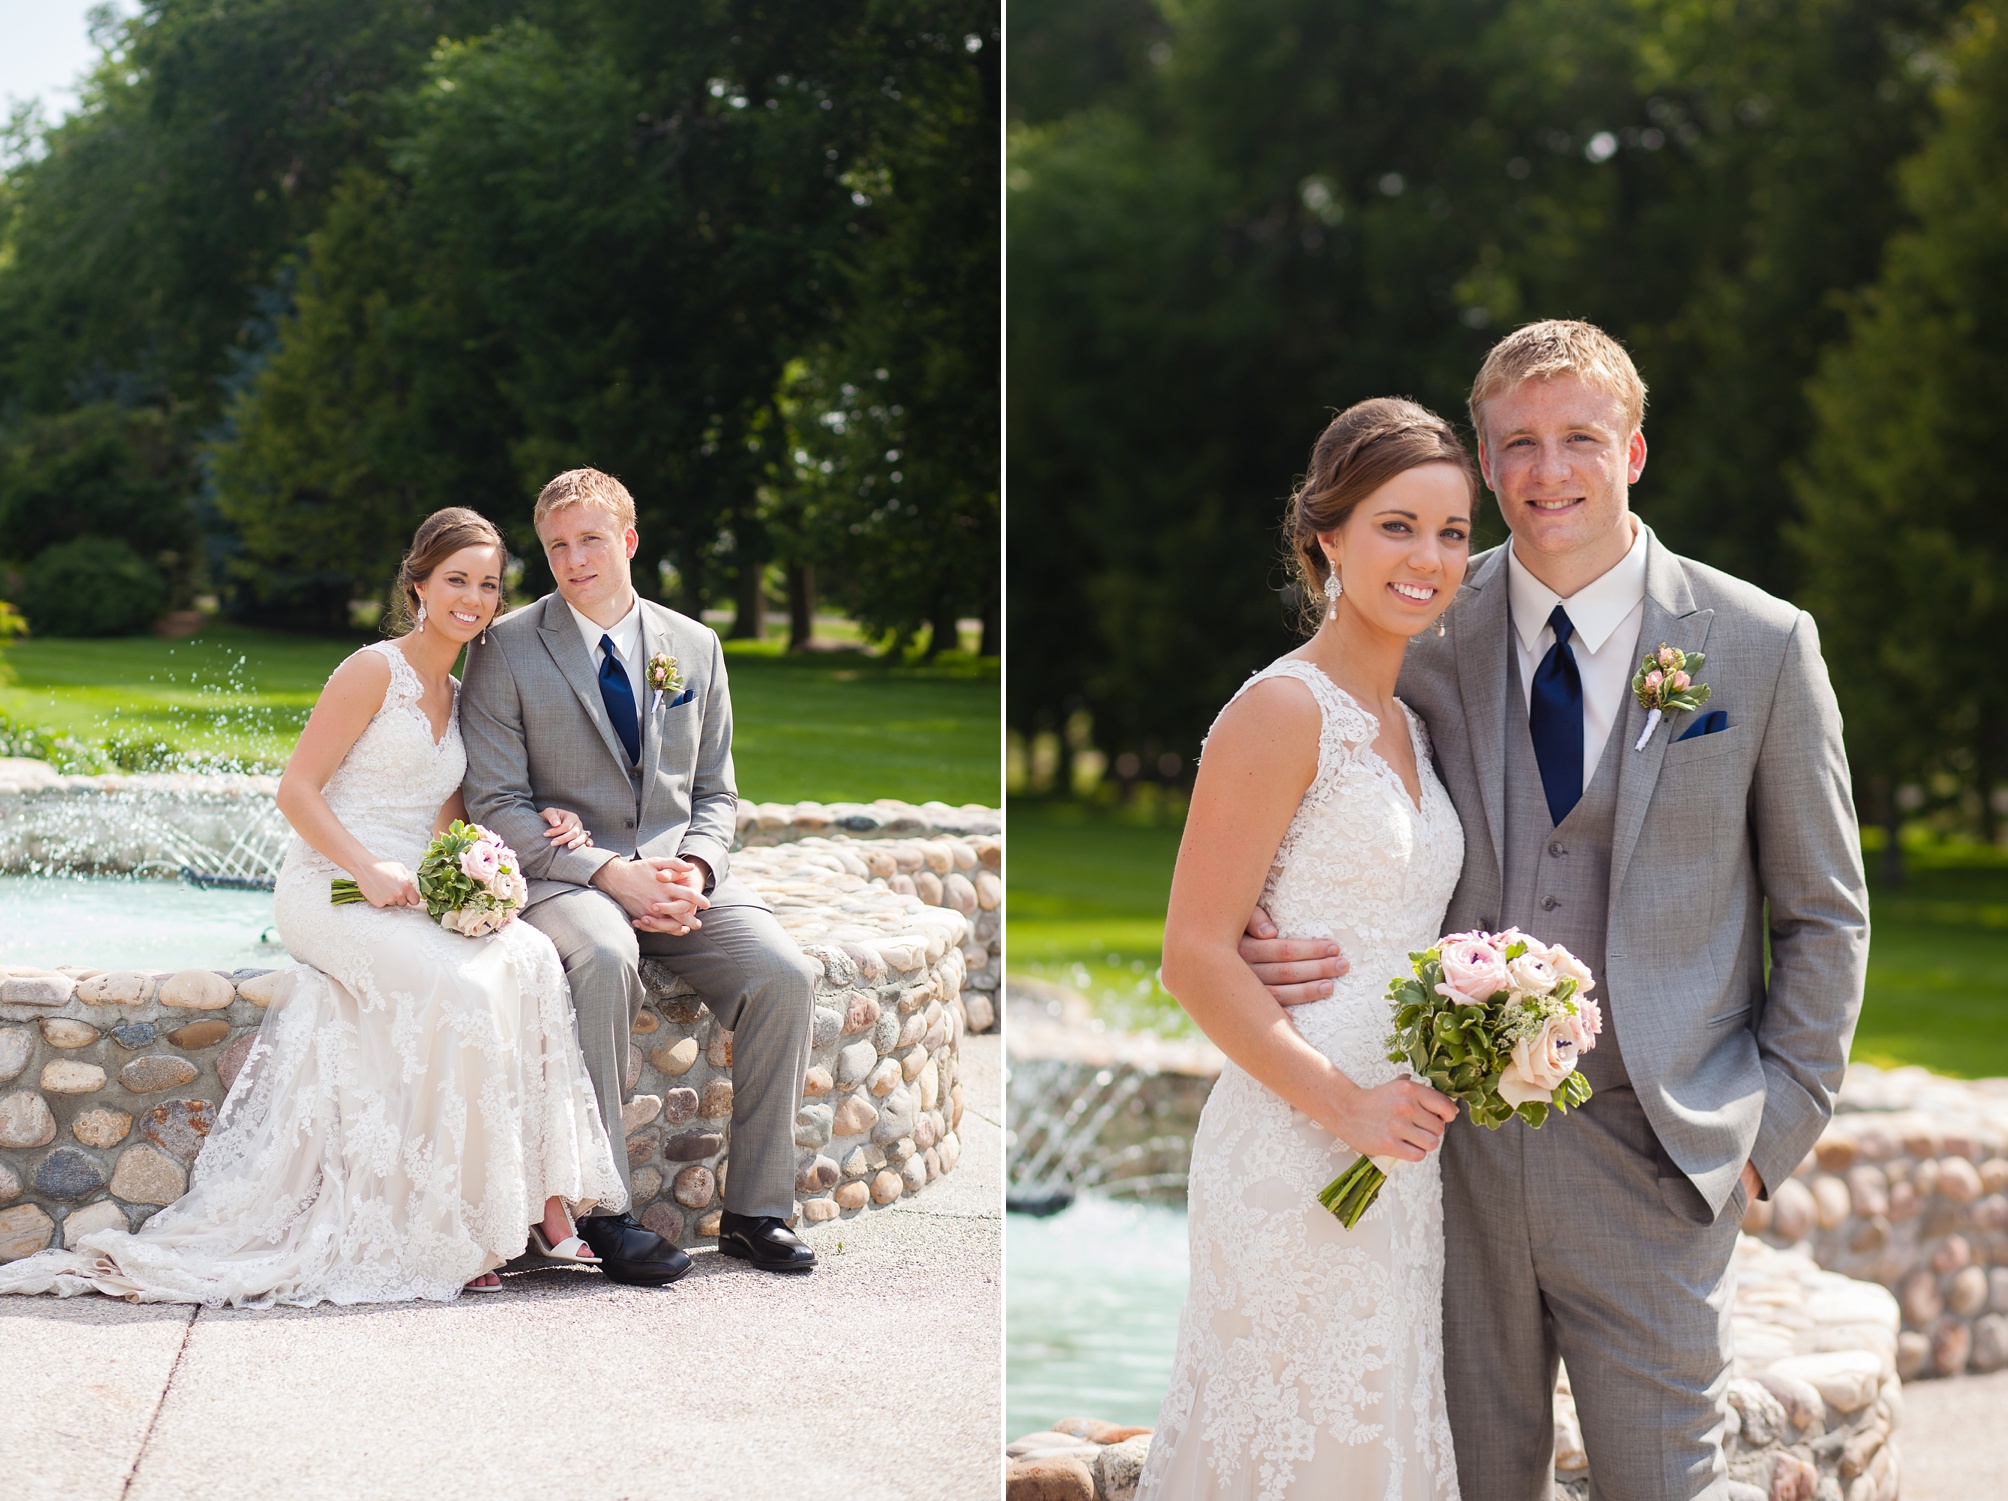 Ben and Lachelle's classy blush pink and navy blue outdoor summer wedding at Valhalla in Taber